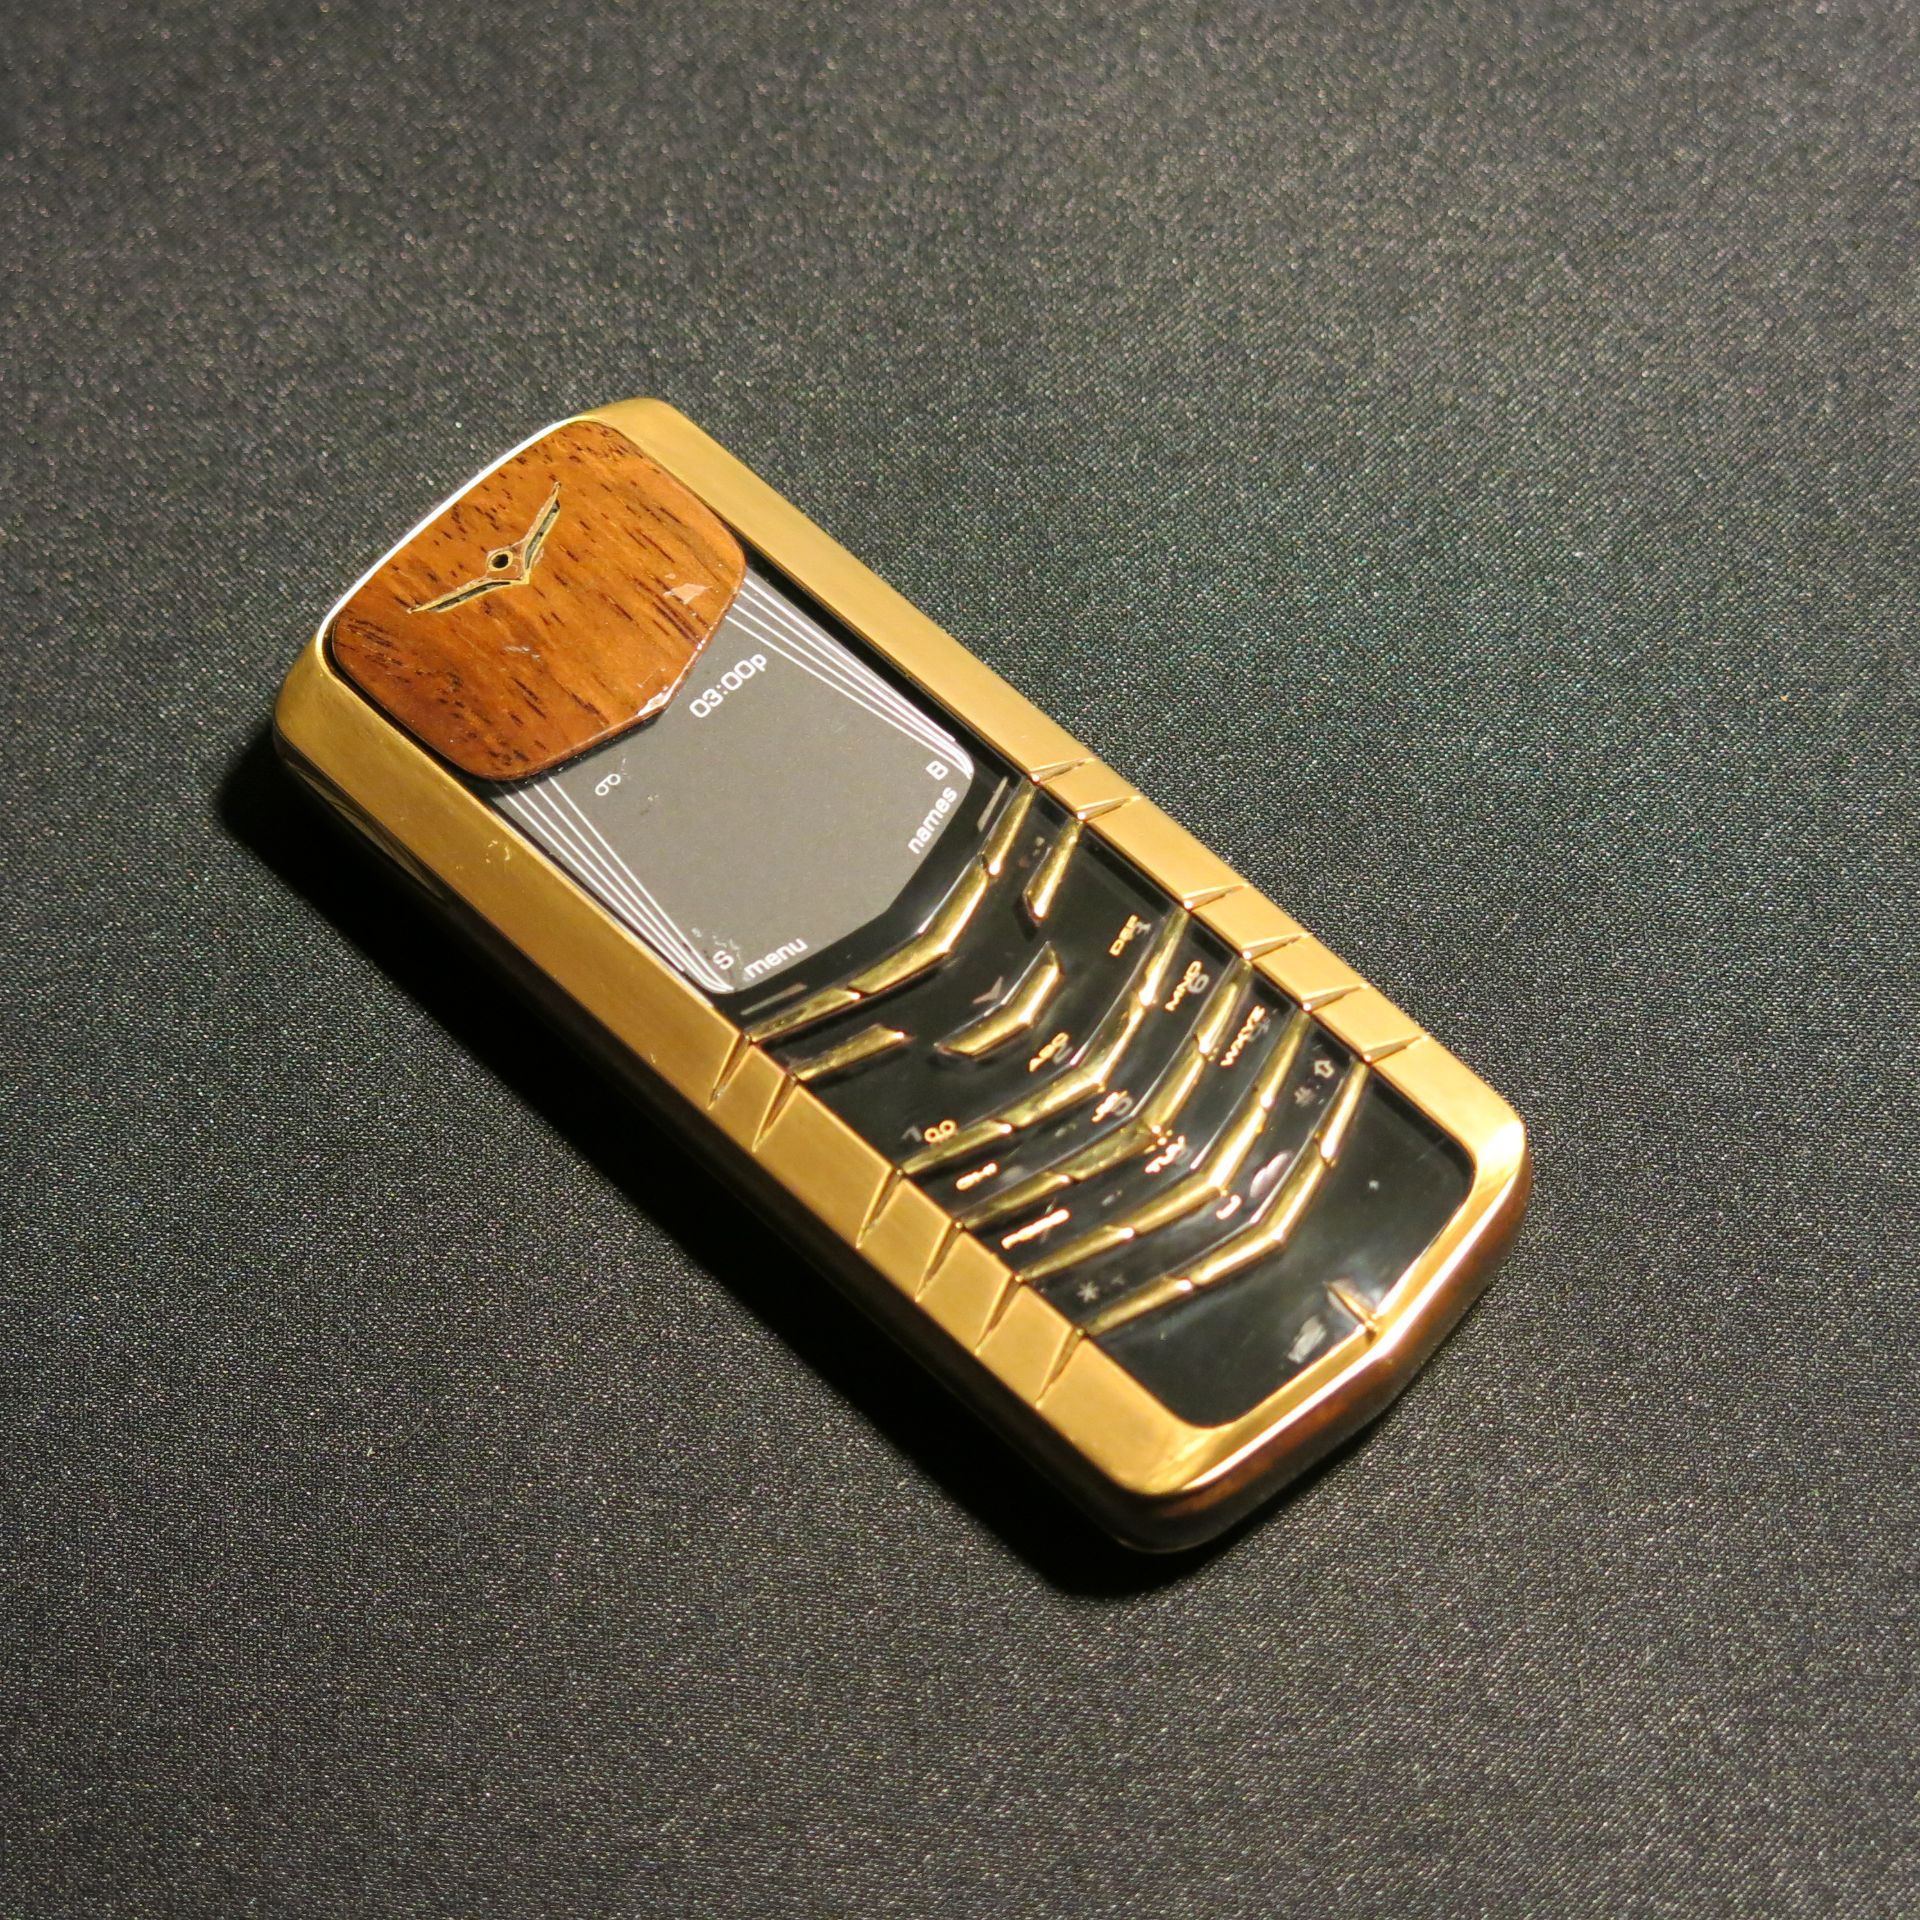 Entire Contents of the VERTU Museum Collection to Include: 105 Various Iconic Phones & Appearance - Image 67 of 106